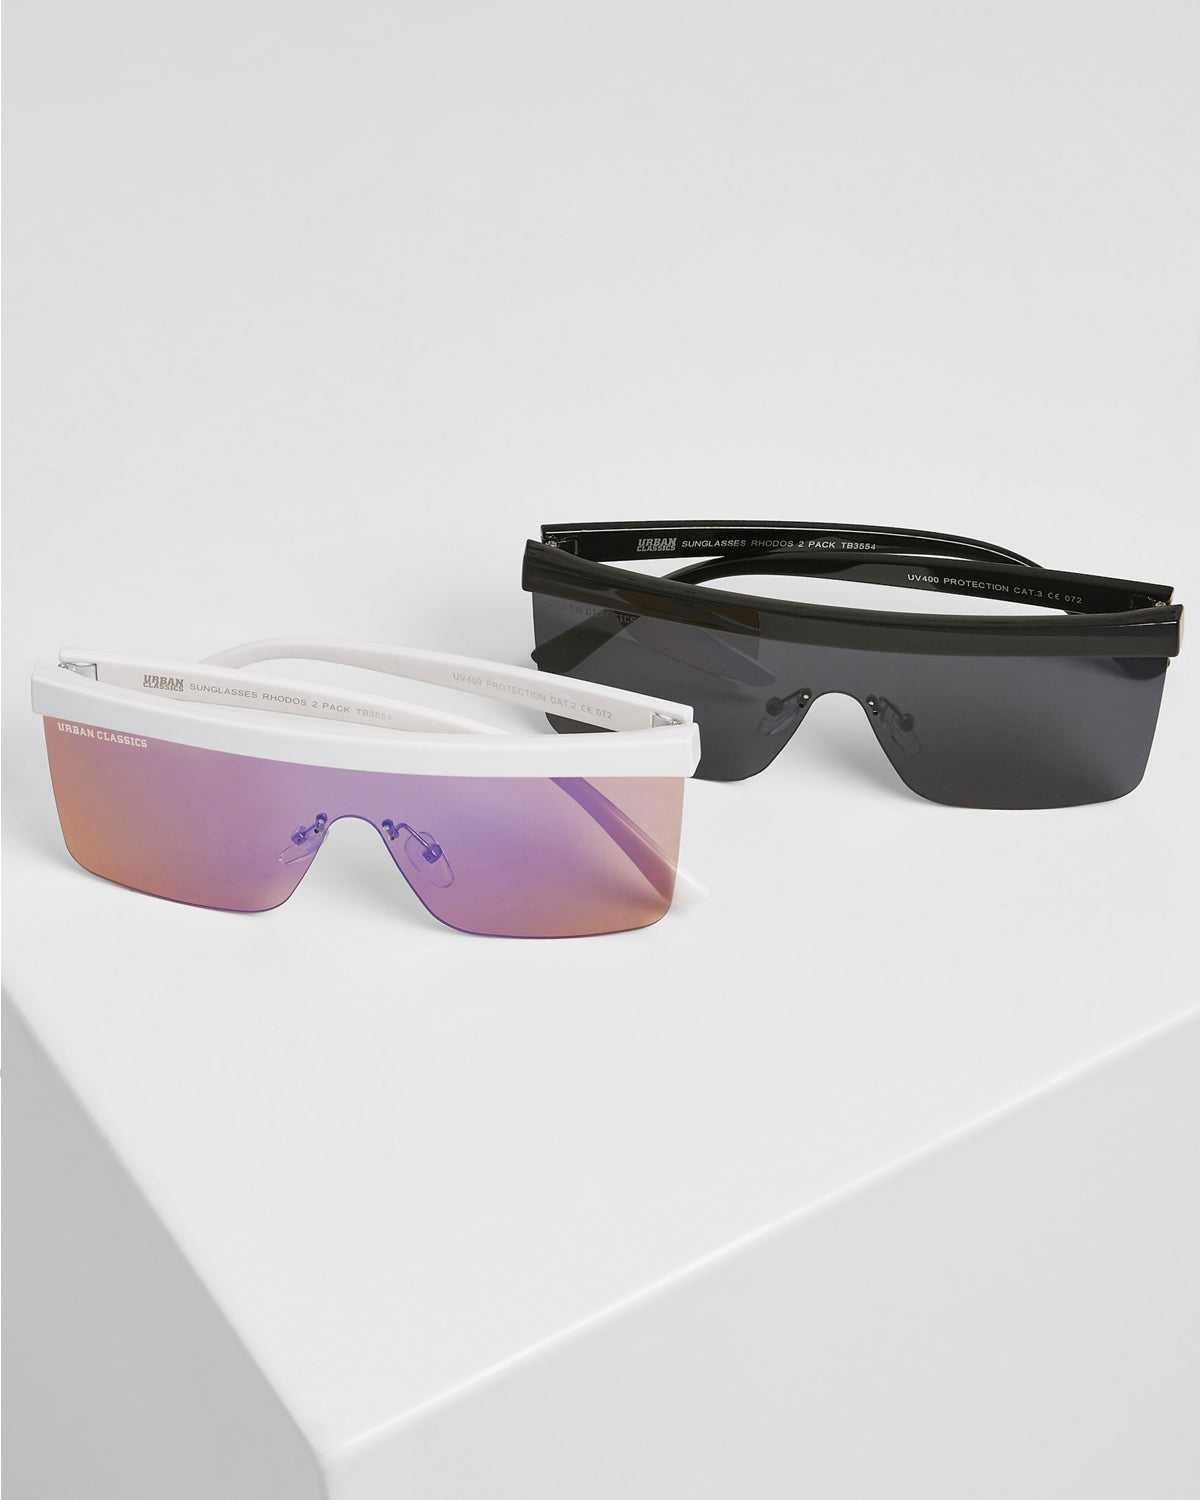 Men's sunglasses from domestic online store